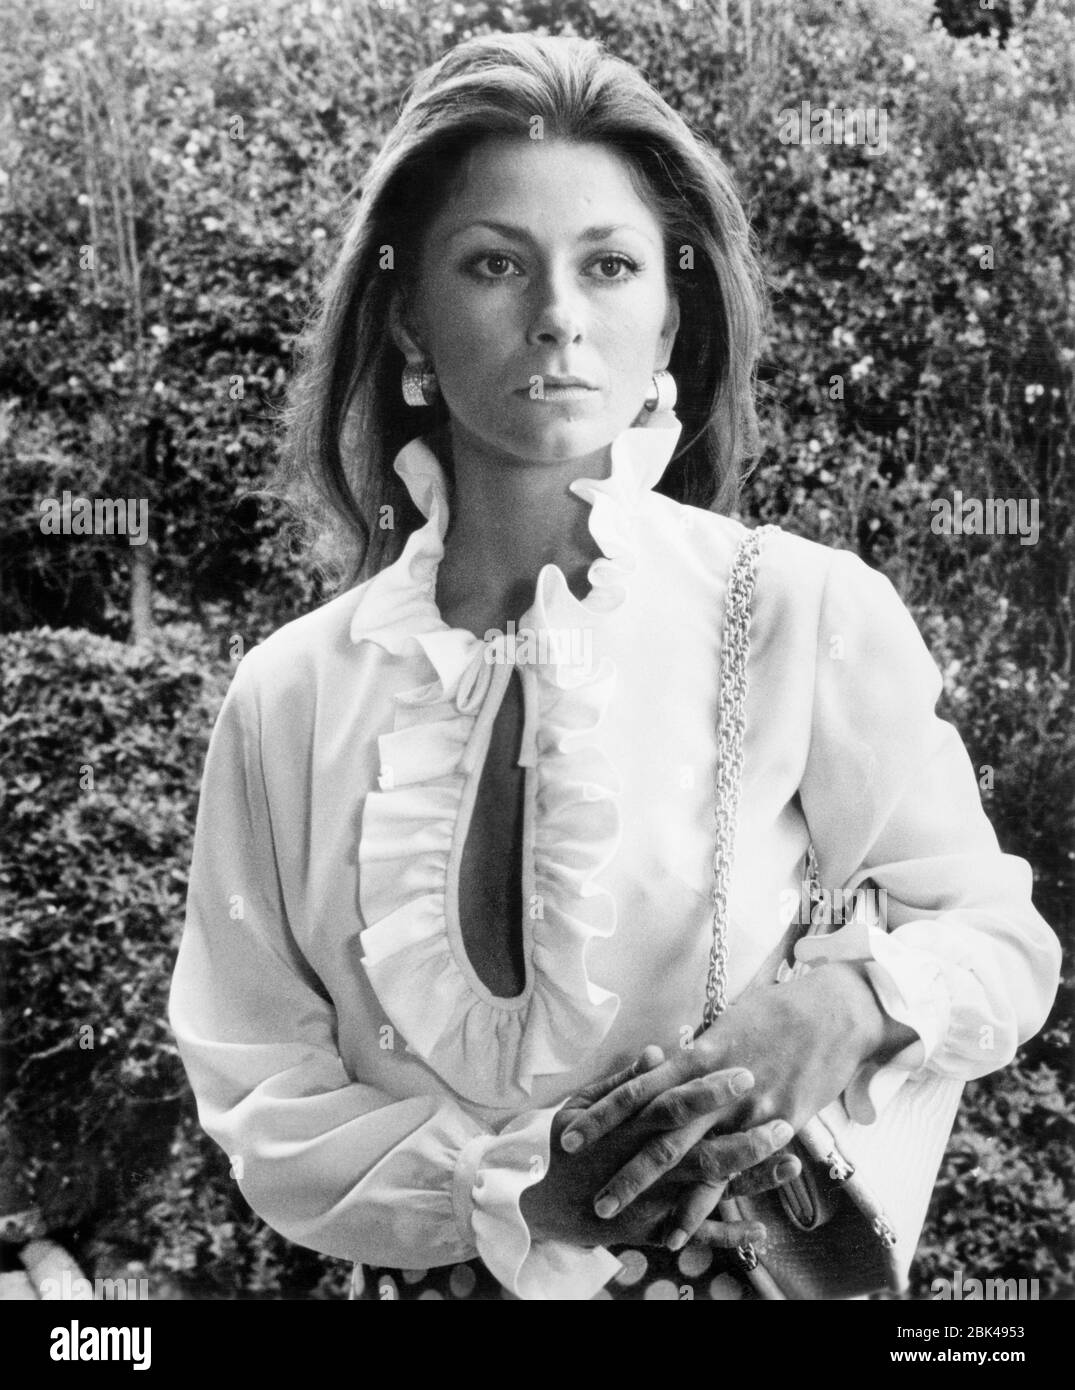 Elizabeth Ashley, Publicity Still from the Film, 'The Marriage of a Young Stockbroker', 20th Century-Fox, 1971 Stock Photo